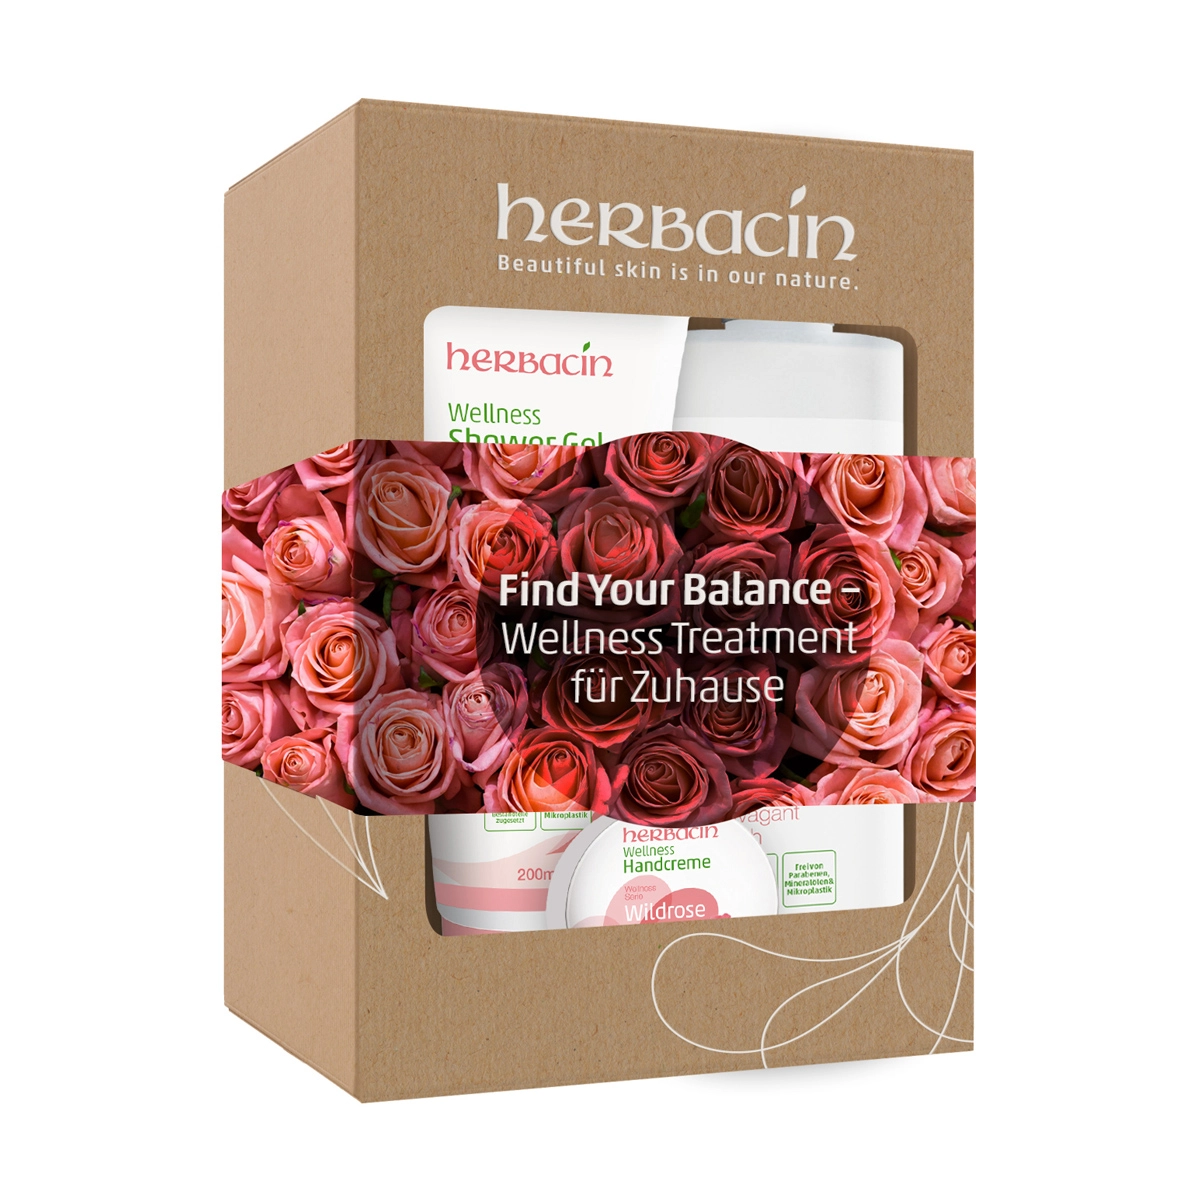 Find Your Balance Gift Set